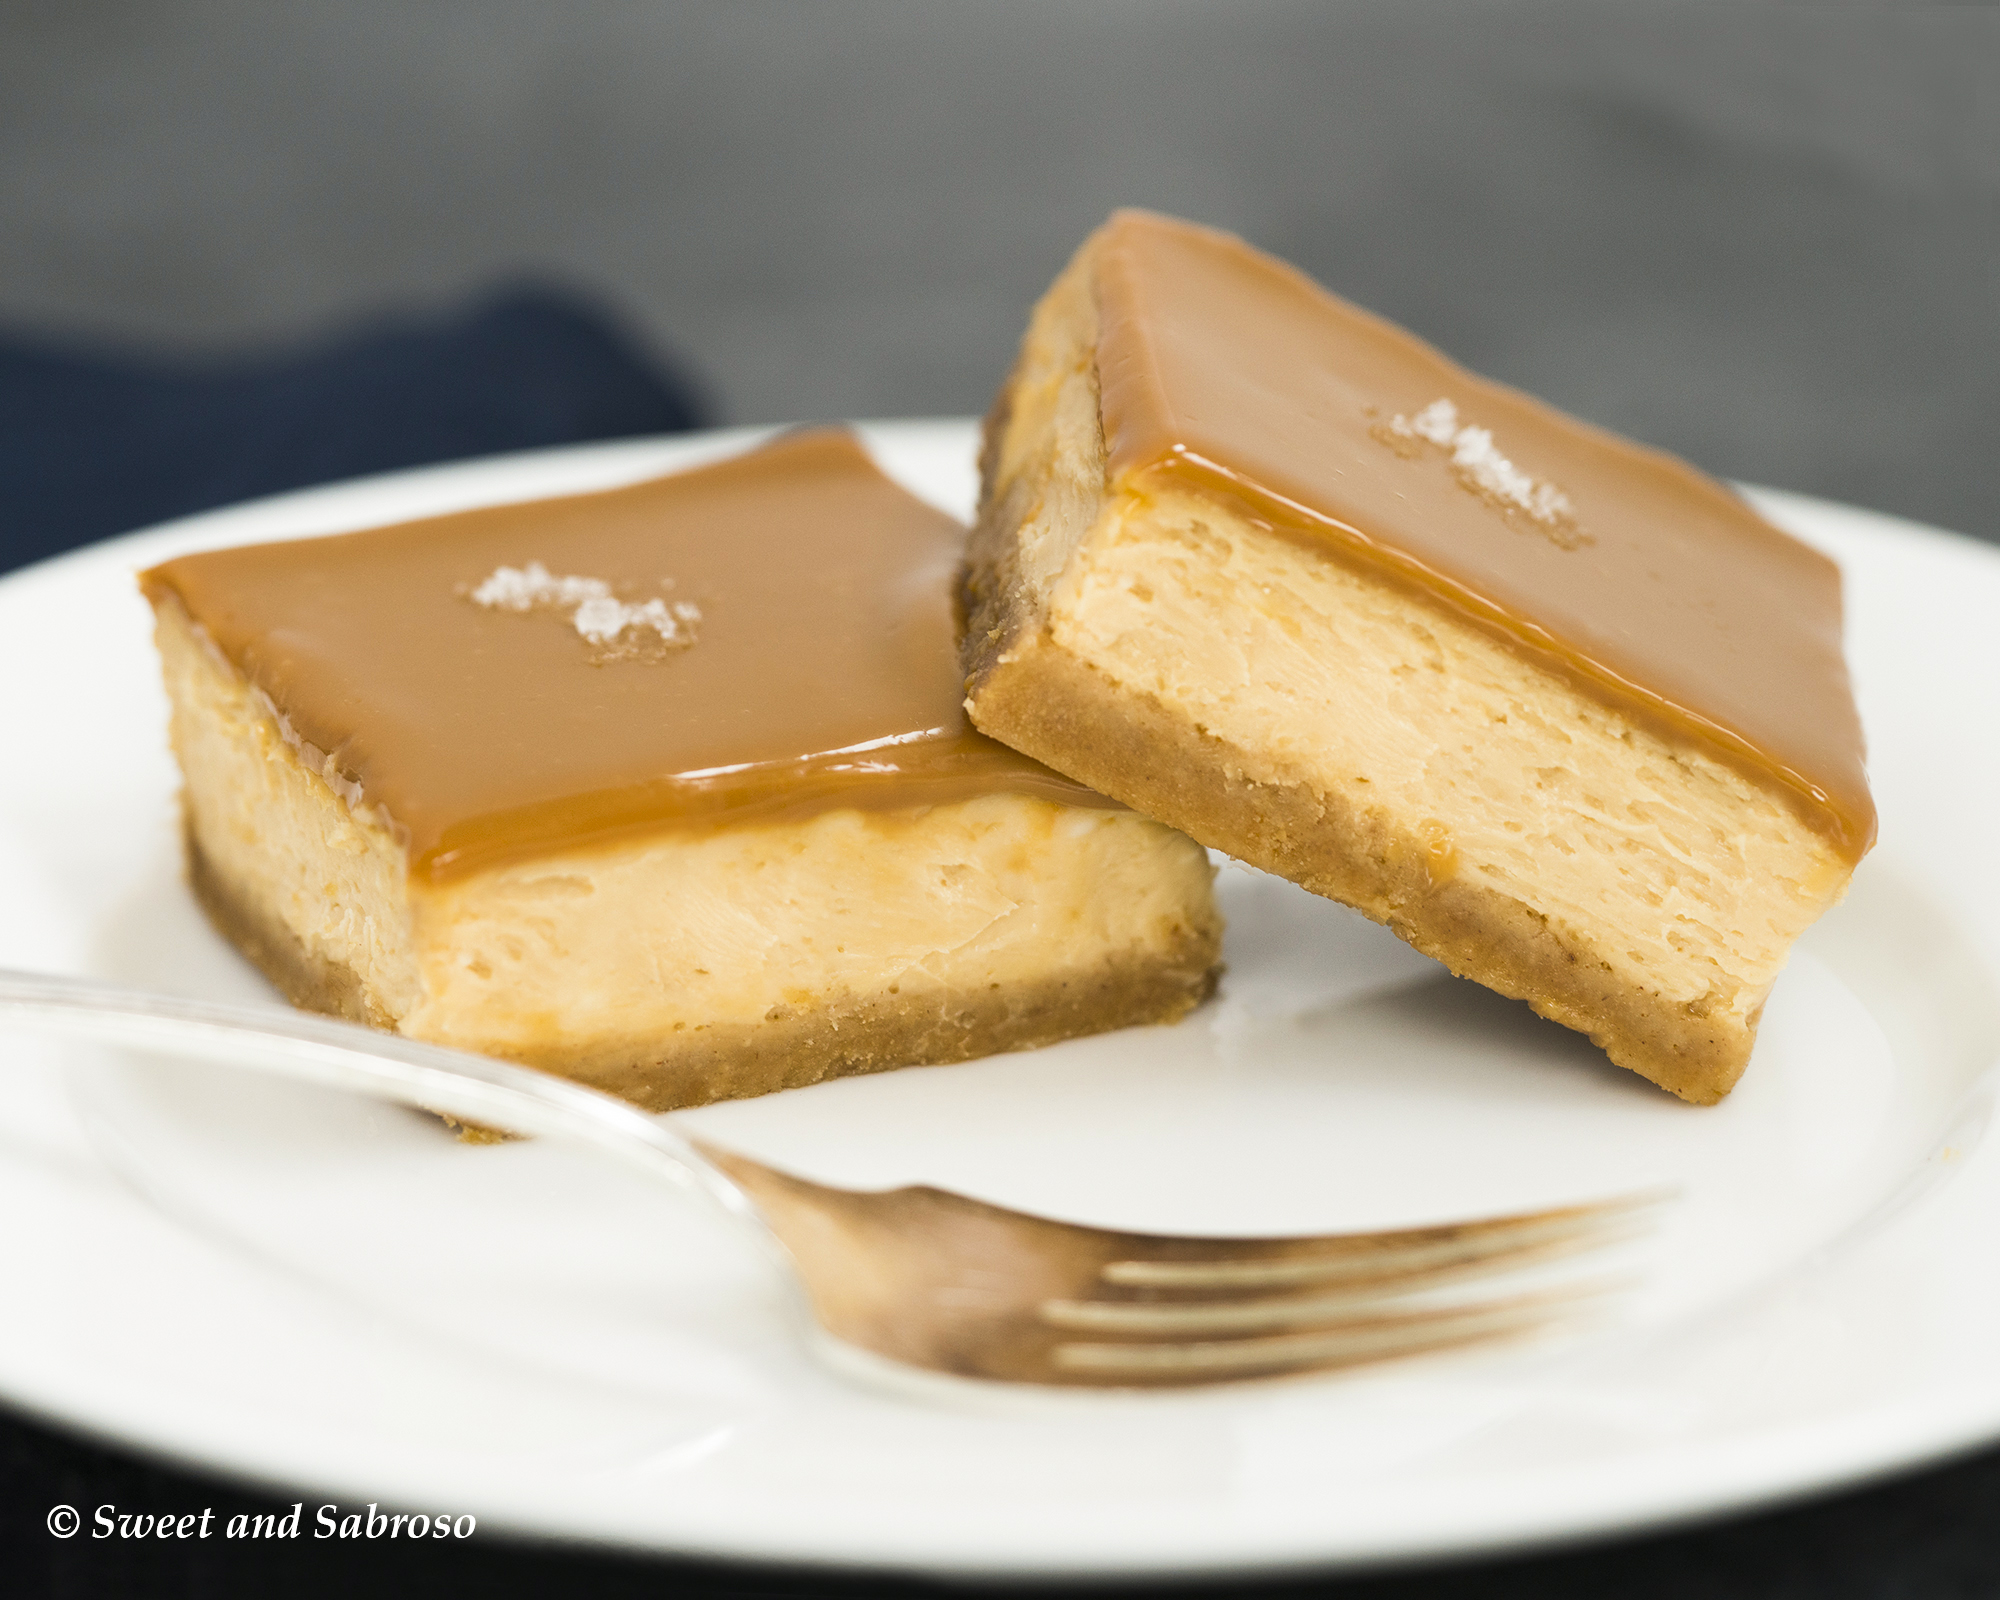 Two Heavenly Salted Dulce de Leche (Caramel) Cheesecake Bars Plated with a Fork